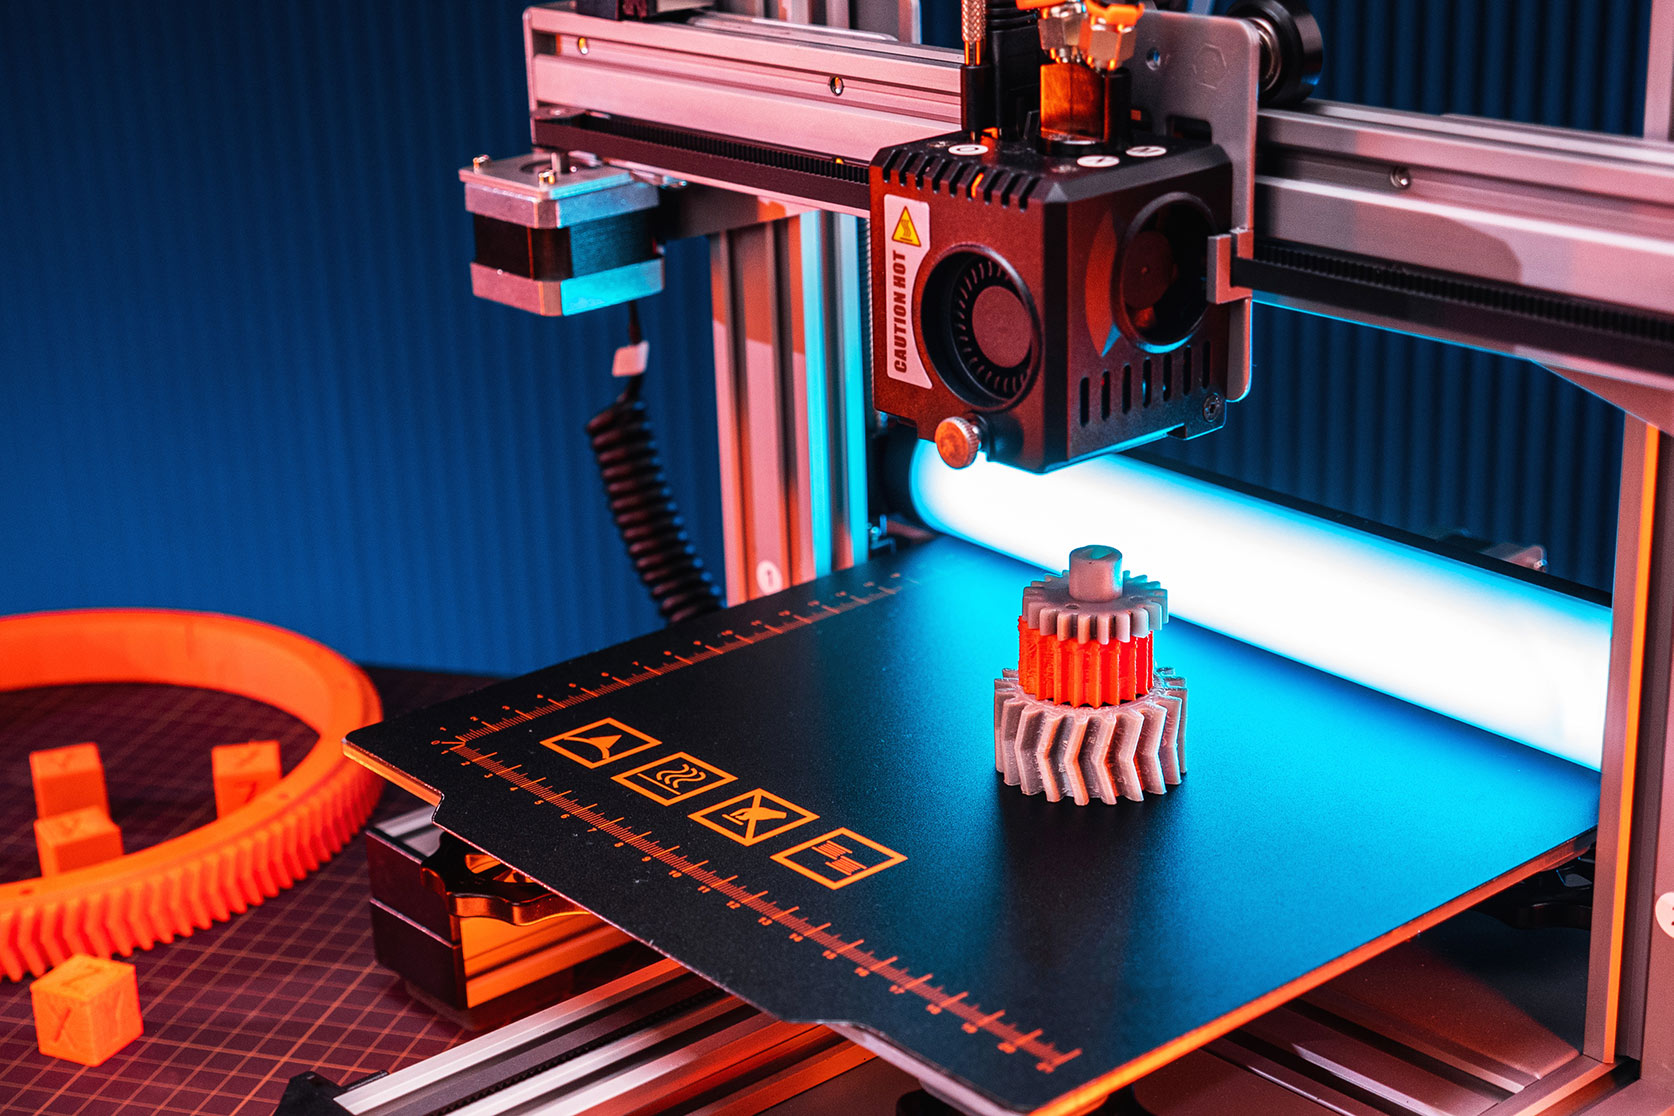 3D Printing and Future Supply Chain